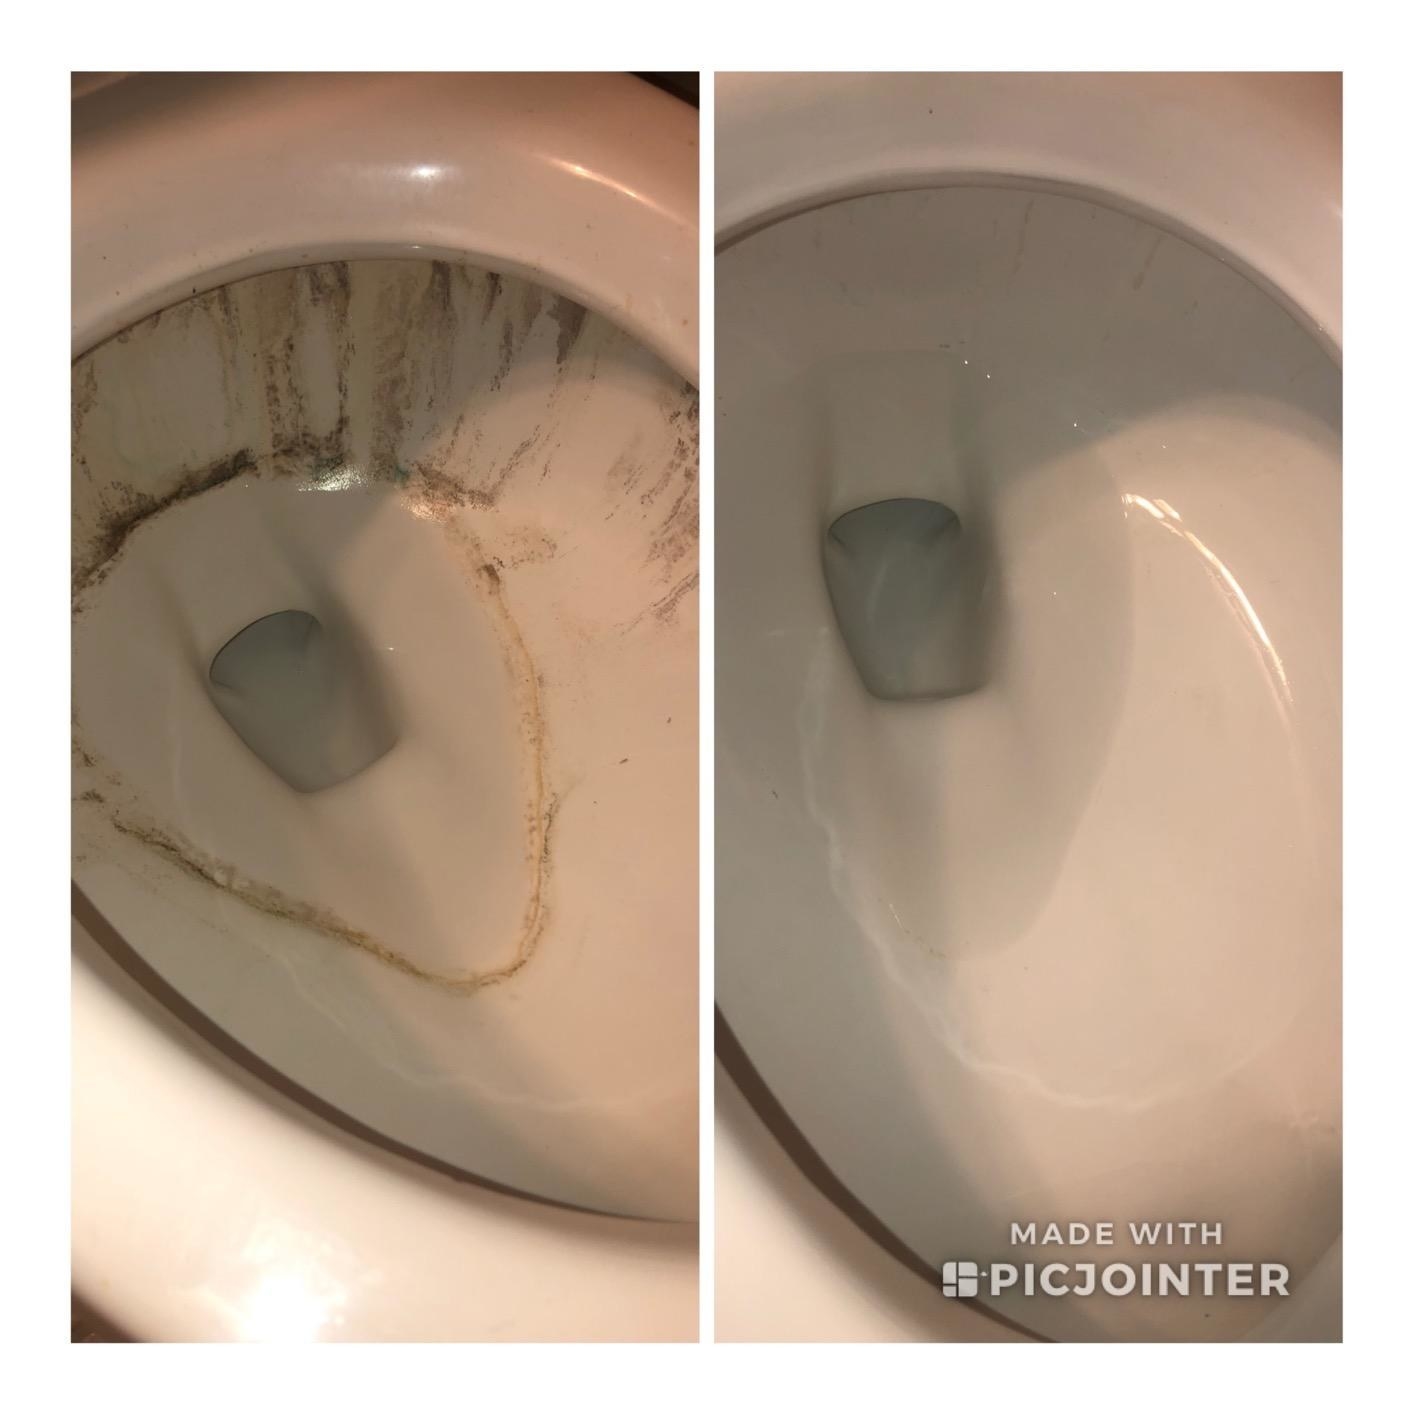 On the left: A review image of a toilet with many brown stains; on the right: The same toilet sparkling clean